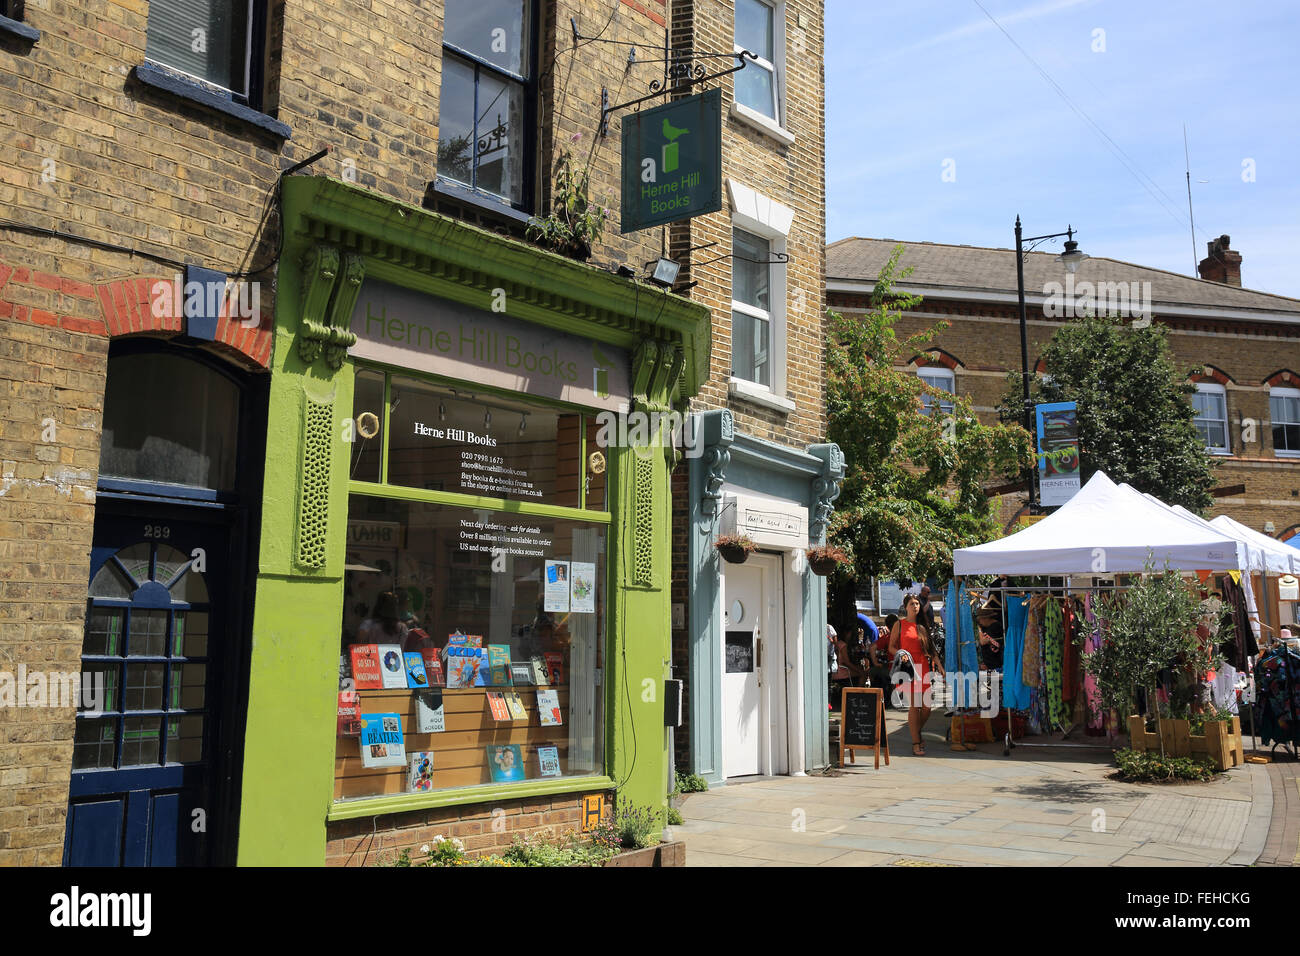 Local shops and the Saturday market on Railton Road, in upmarket Herne Hill, SE London, England, UK Stock Photo